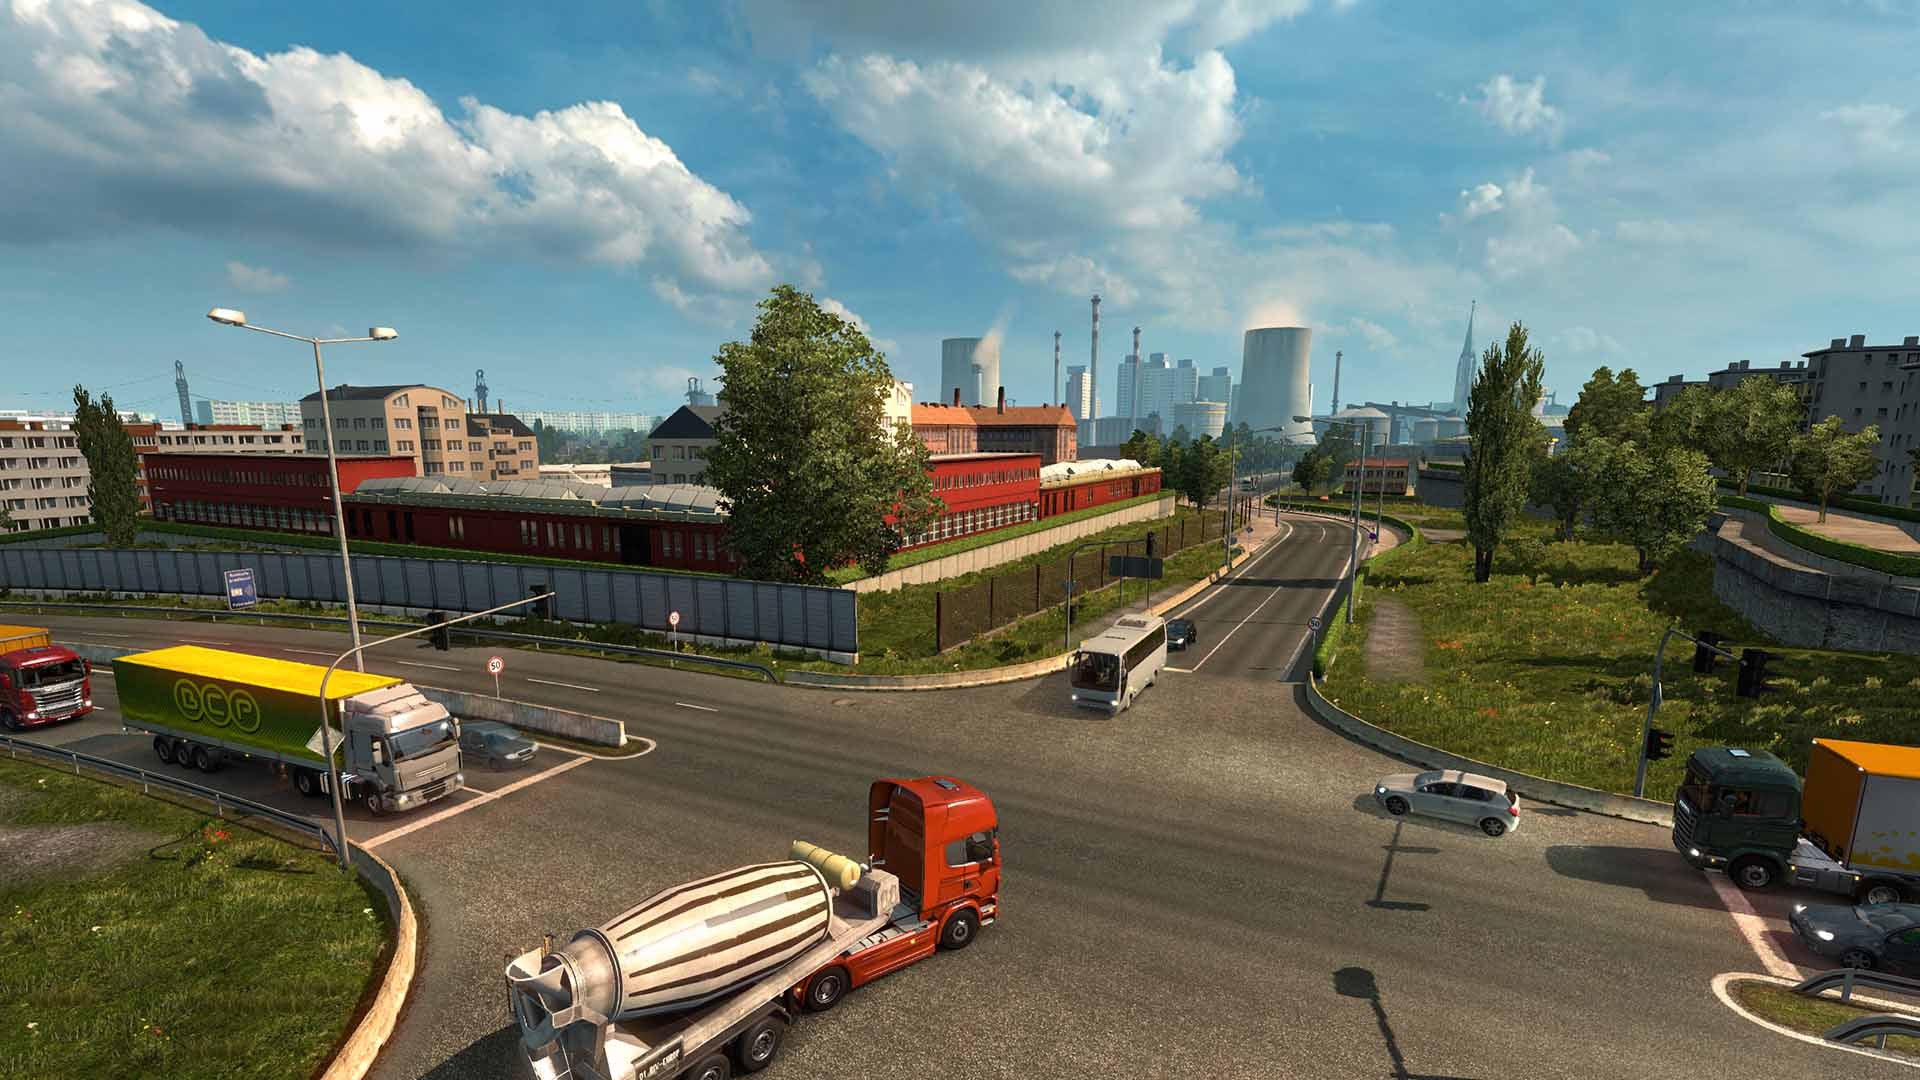 PS4 features and games Euro truck simulator 2 gameplay [HD] 